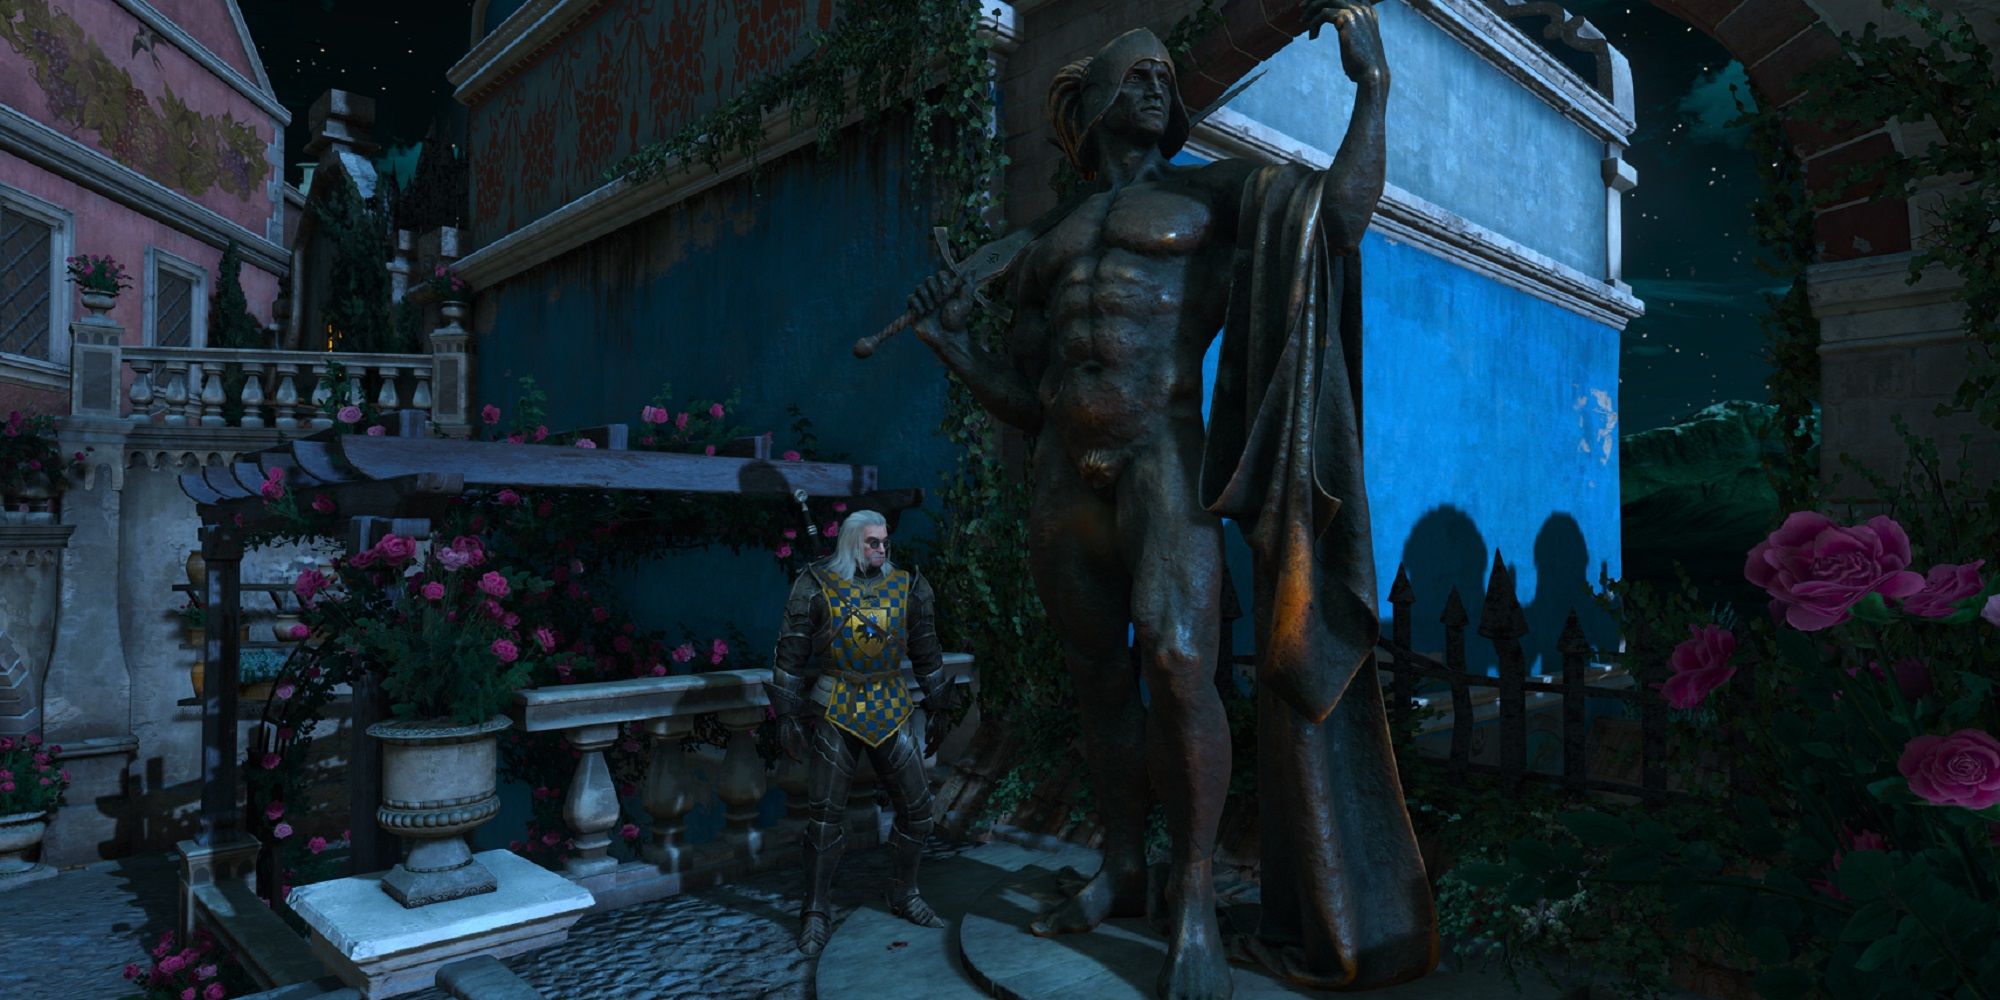 Geralt next to a statue in the Witcher 3